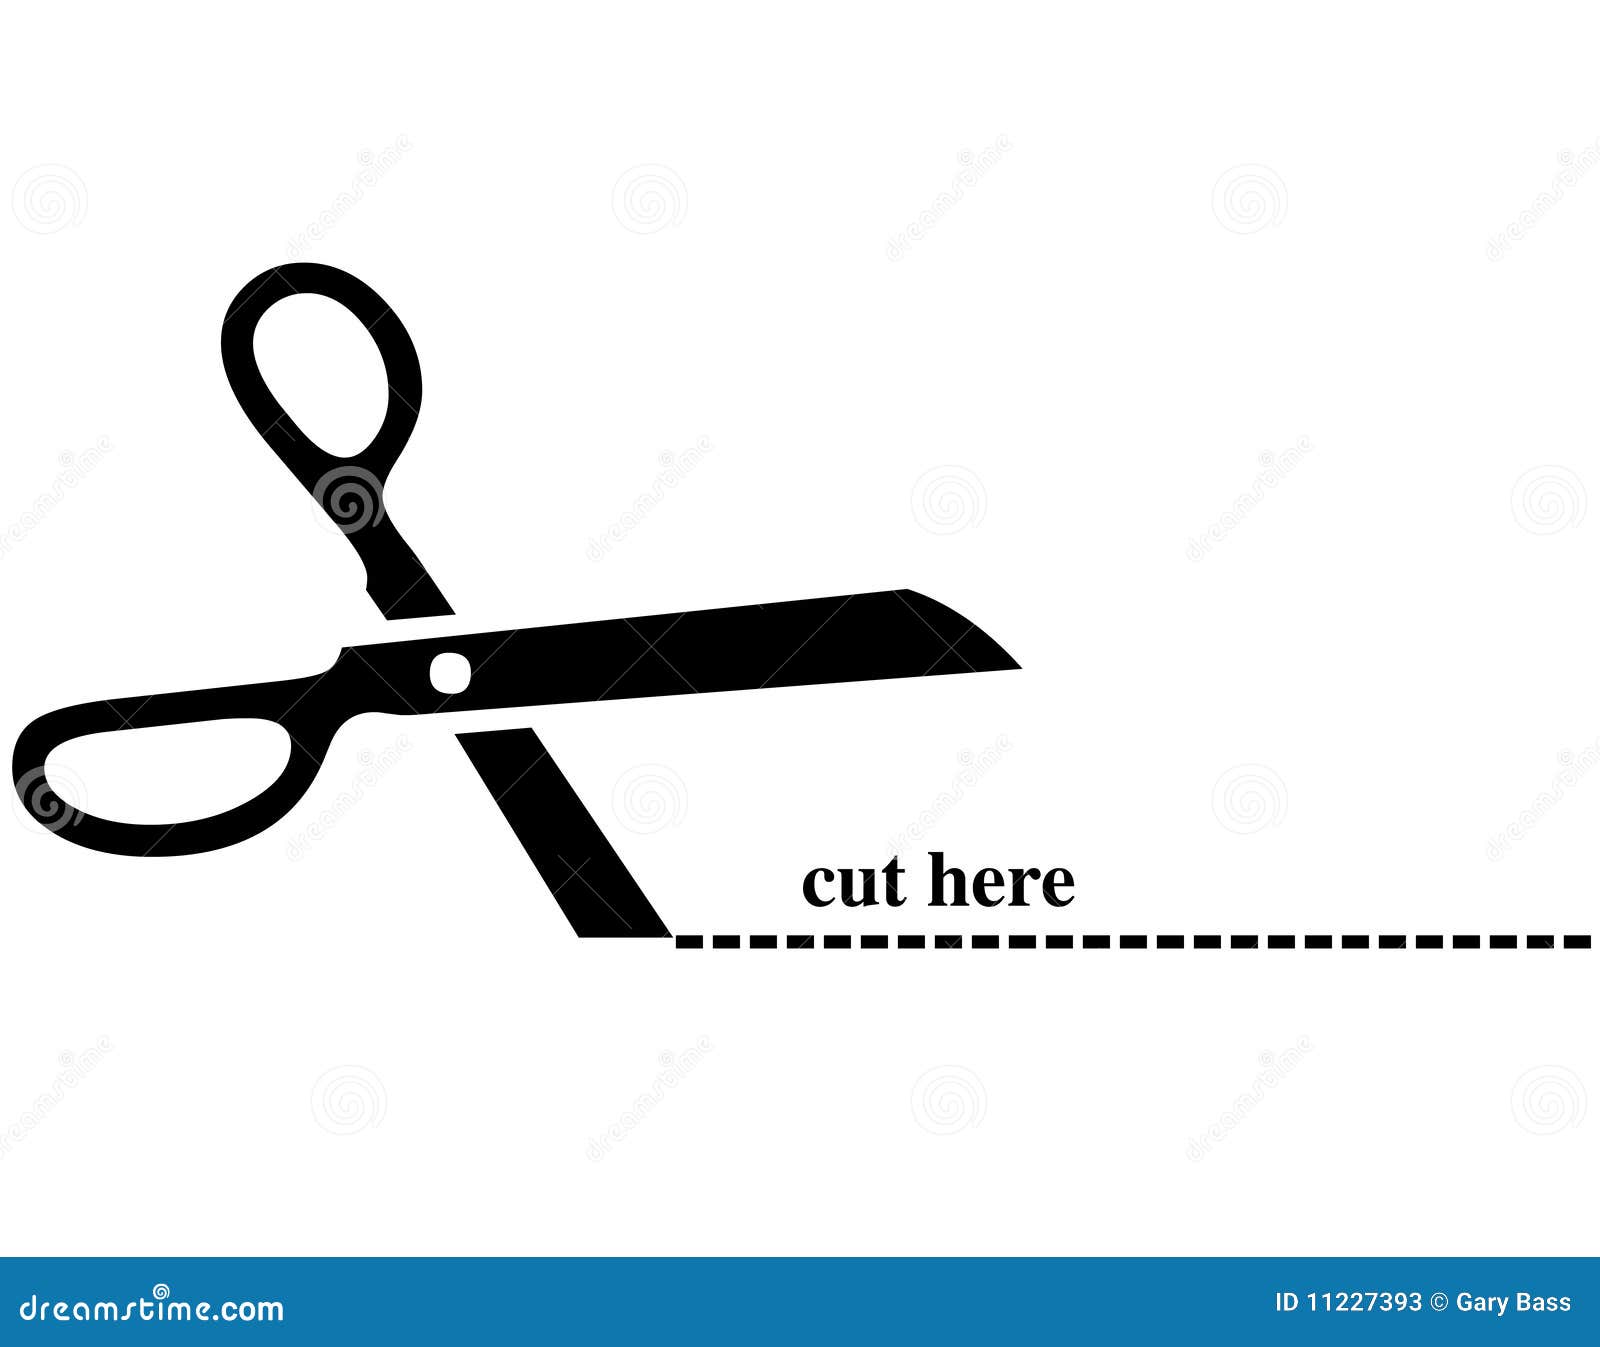 clip art dotted line with scissors - photo #19